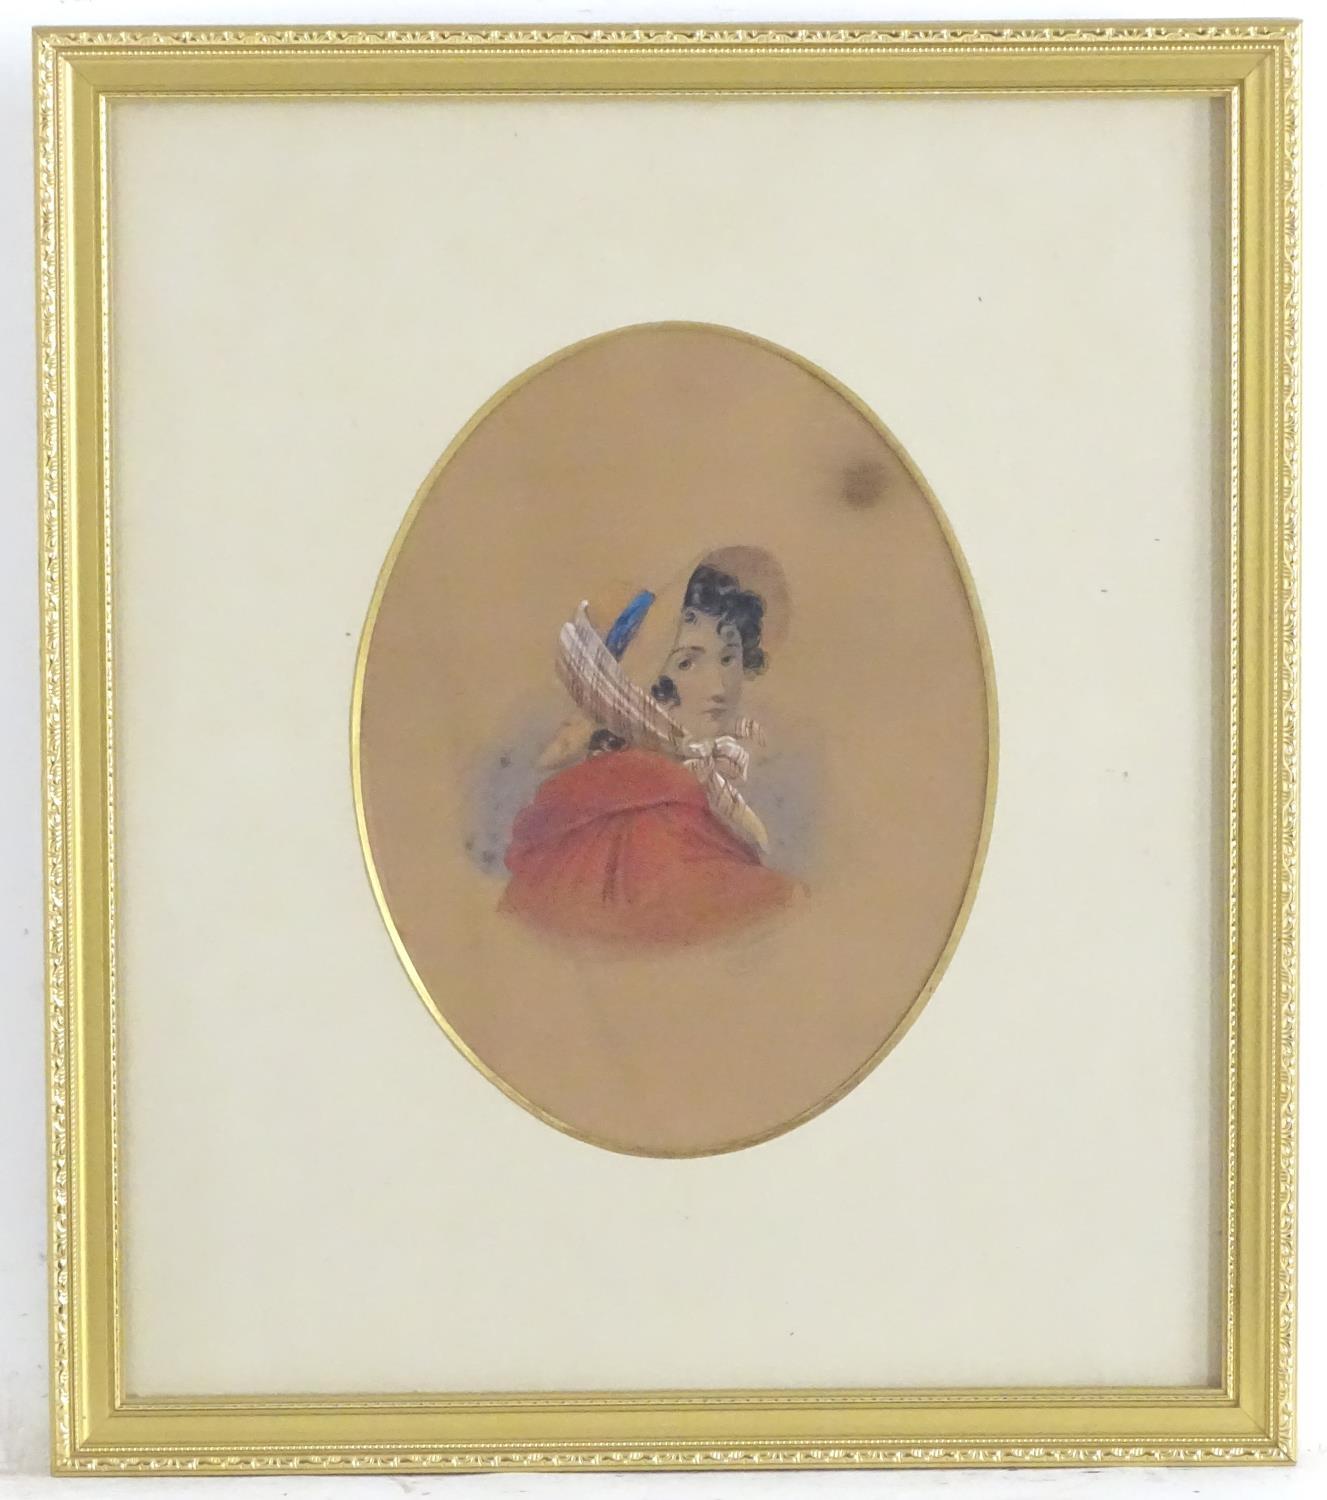 J. W. Moore, XIX, English School, Watercolour and pencil, A portrait of a girl in bonnet. Signed and